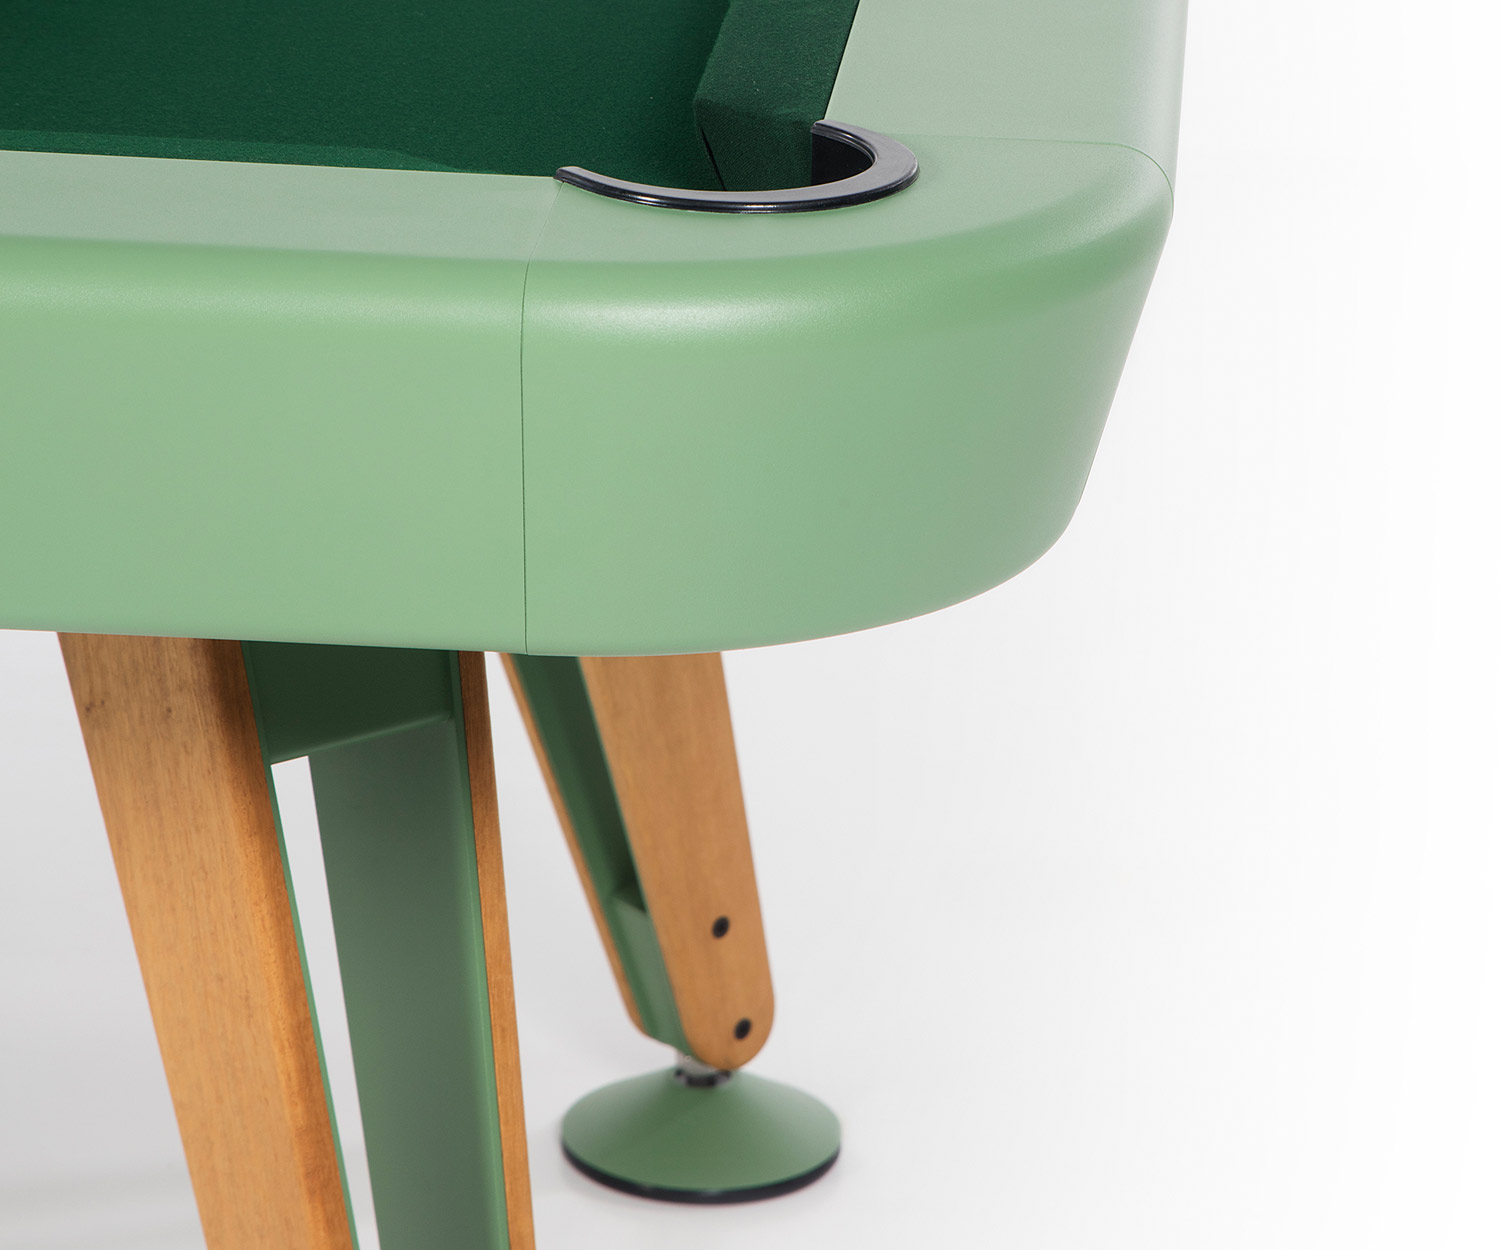 Diagonal corner pool table from RS Barcelona in detail with fabric cover and green lacquer finish